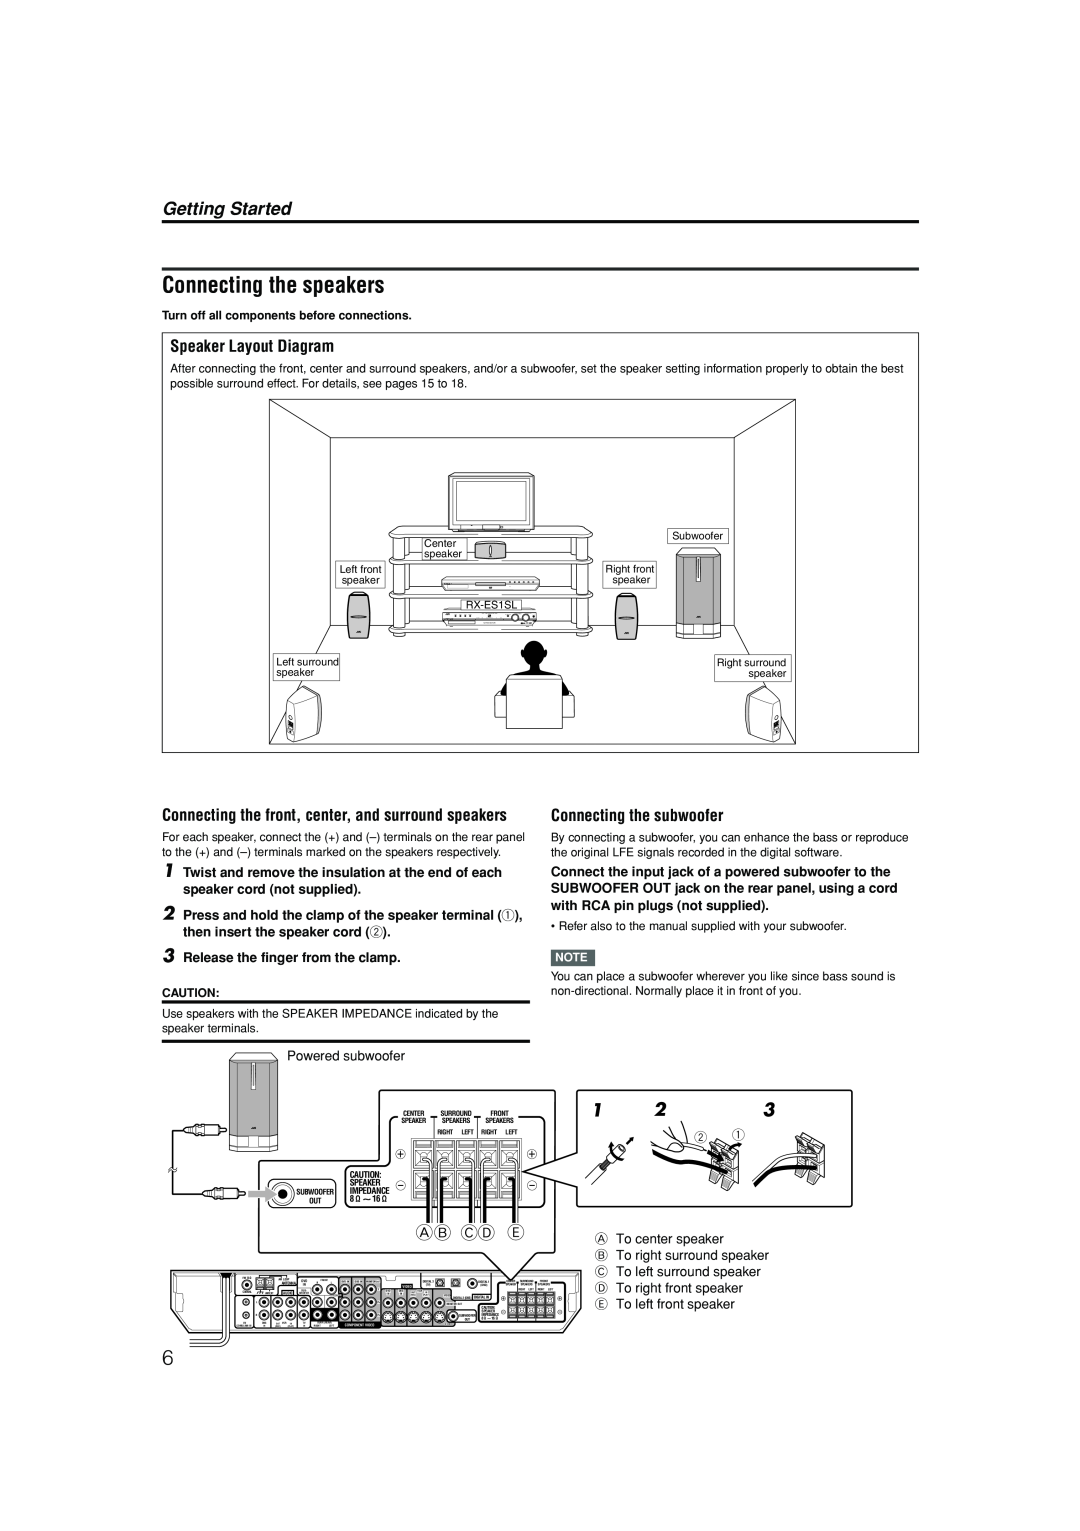 JVC RX-ES1SL manual Connecting the speakers, Getting Started, Ab Cd E, Speaker Layout Diagram, Connecting the subwoofer 